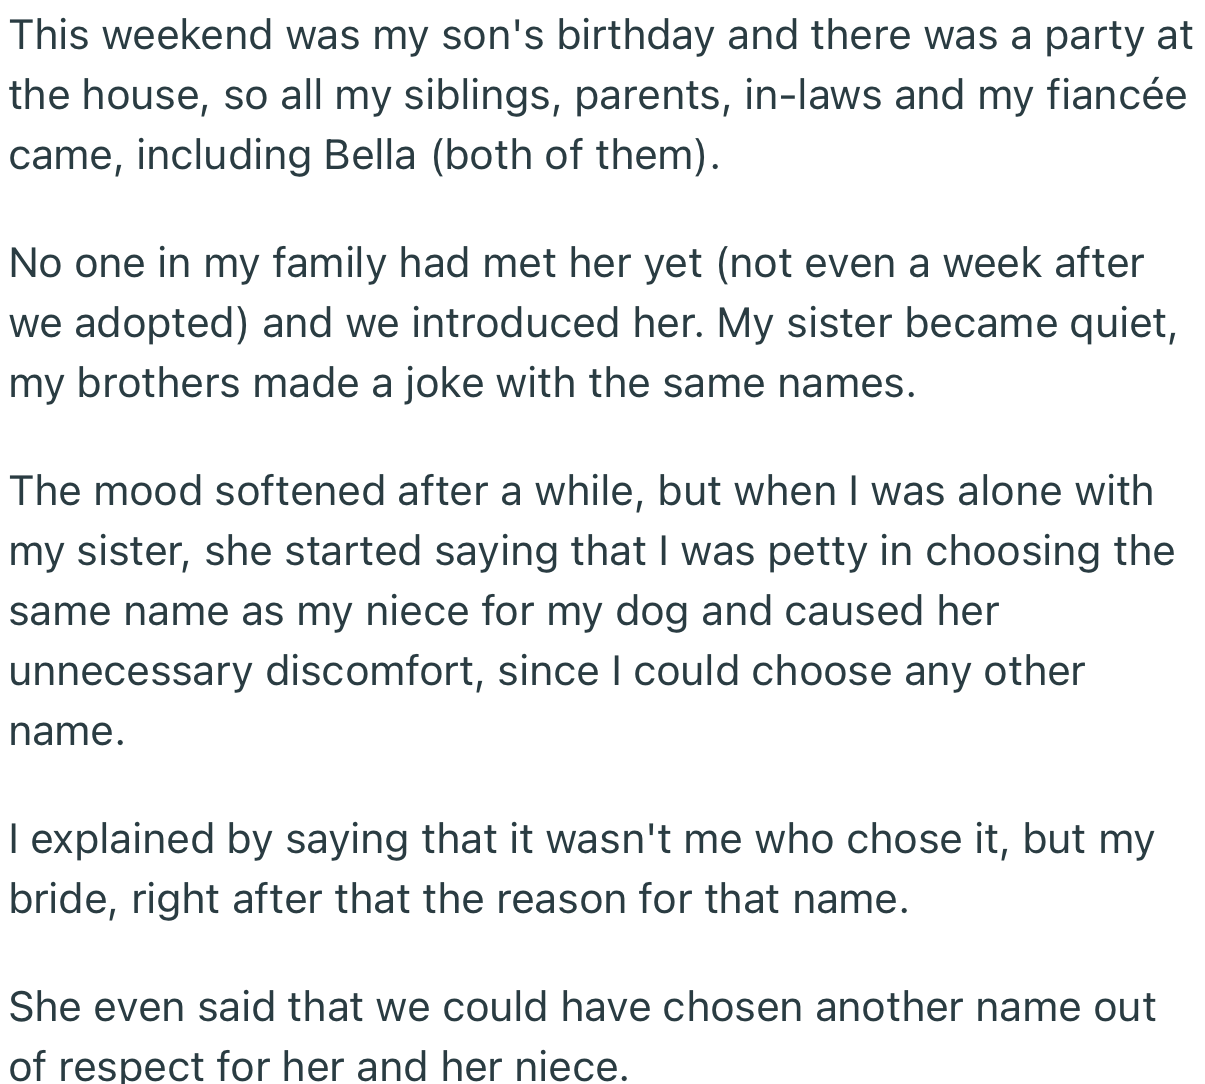 The family gathered for a birthday party, only for OP’s sister to discover that they had named their dog after her daughter